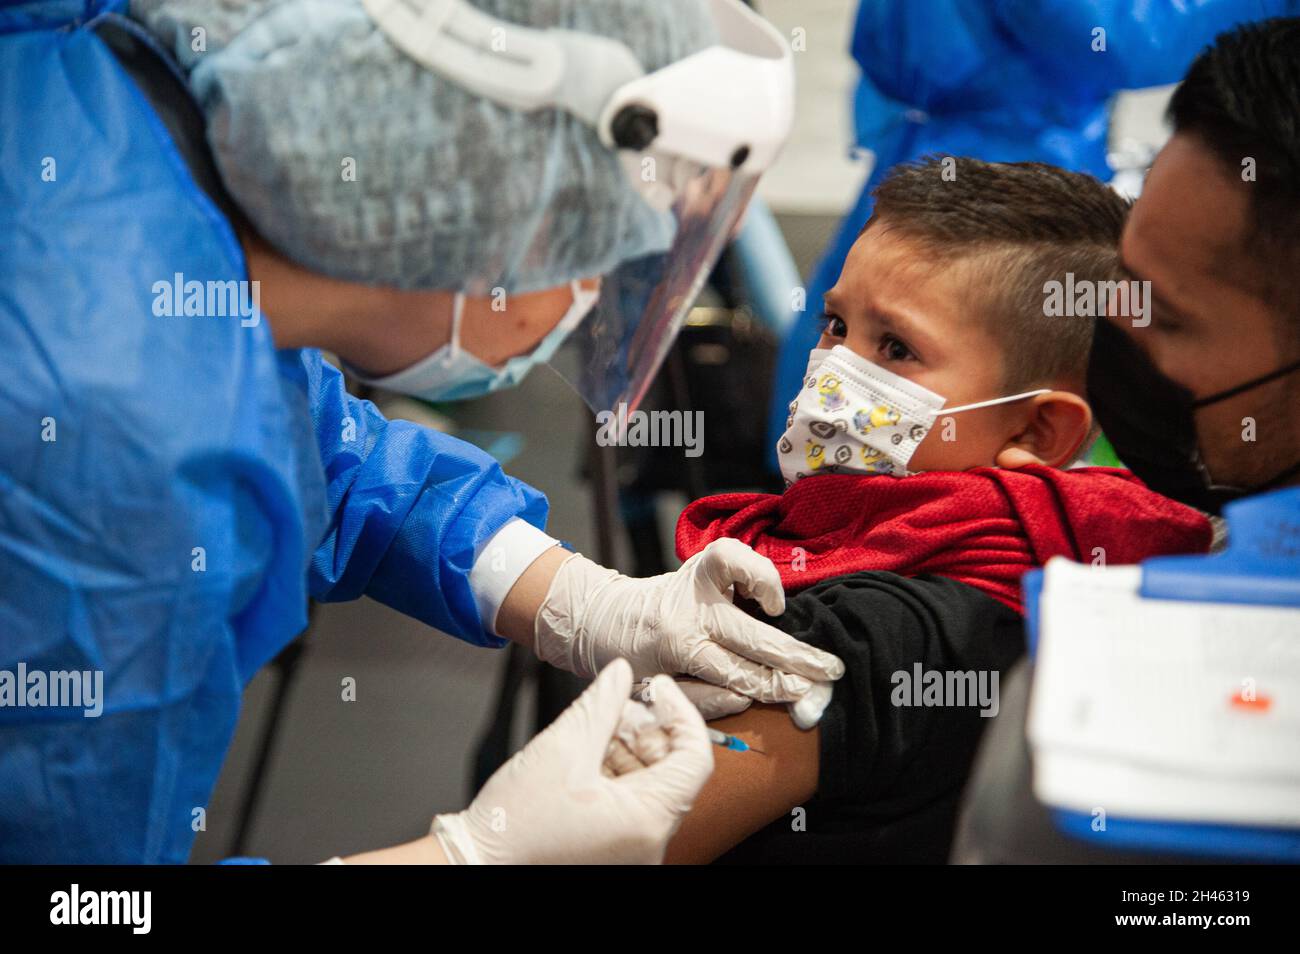 A child cries as he gets the first dose of the COVID-19 vaccine as the Colombian government begins to vaccinate children between ages 3 to 11 against the Coronavirus disease (COVID-19) with the China's SINOVAC vaccine, in Bogota, Colombia on October 31, 2021. Stock Photo